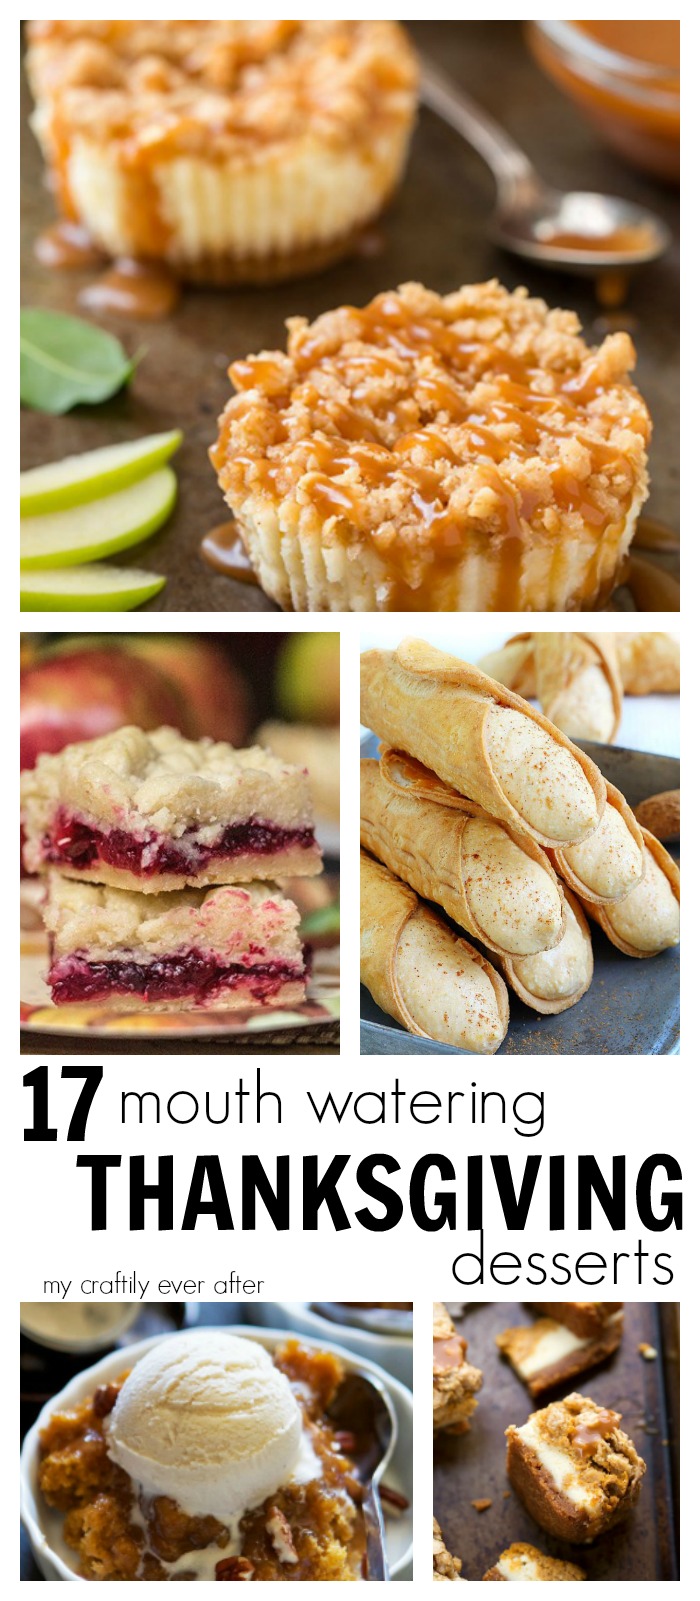 17 Mouth Watering Thanksgiving Desserts - My Craftily Ever After